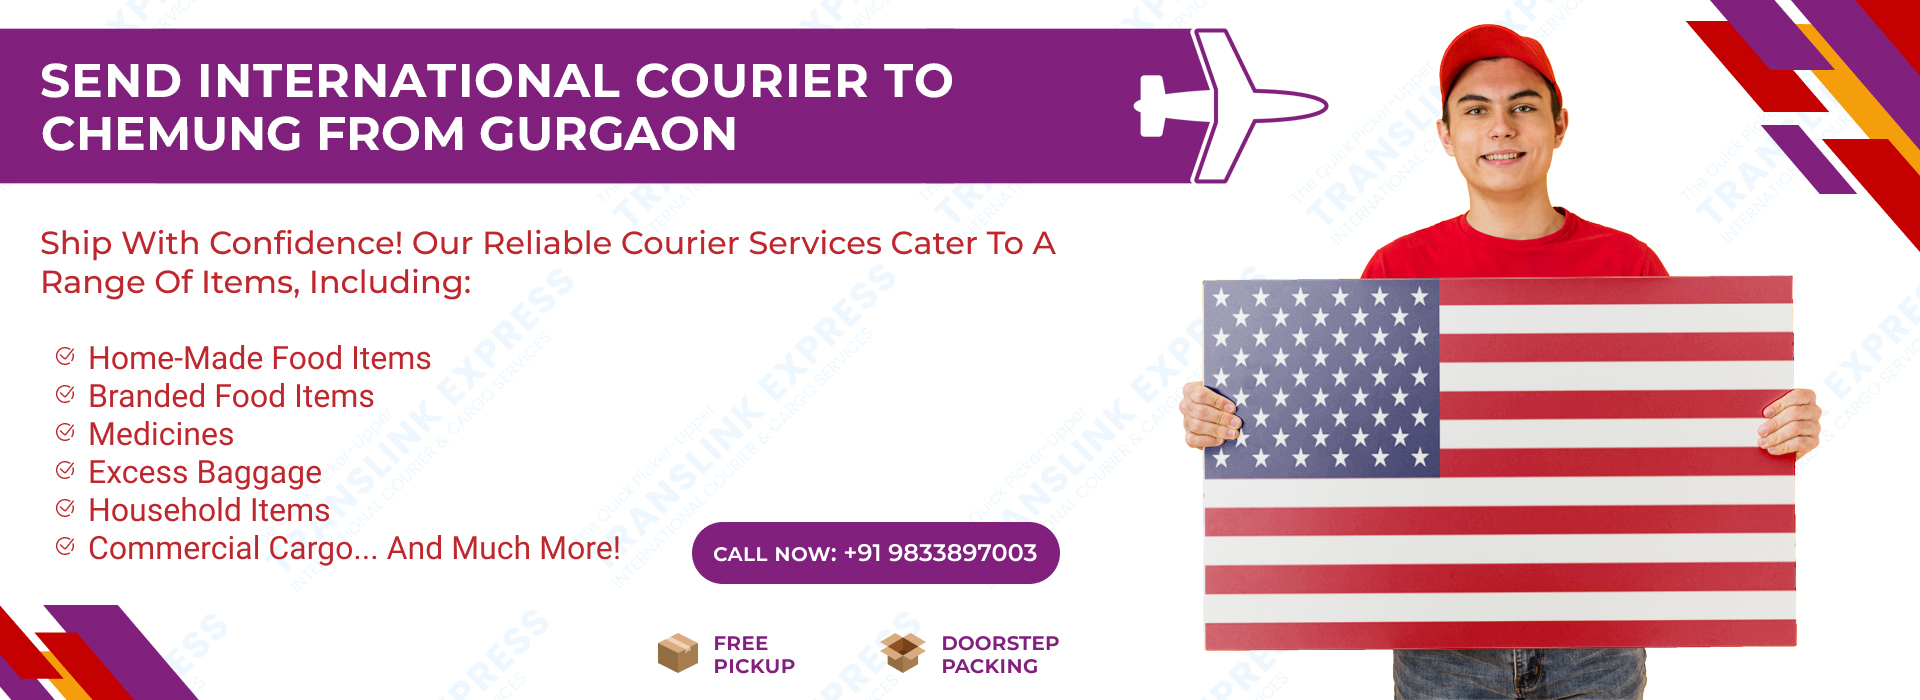 Courier to Chemung From Gurgaon